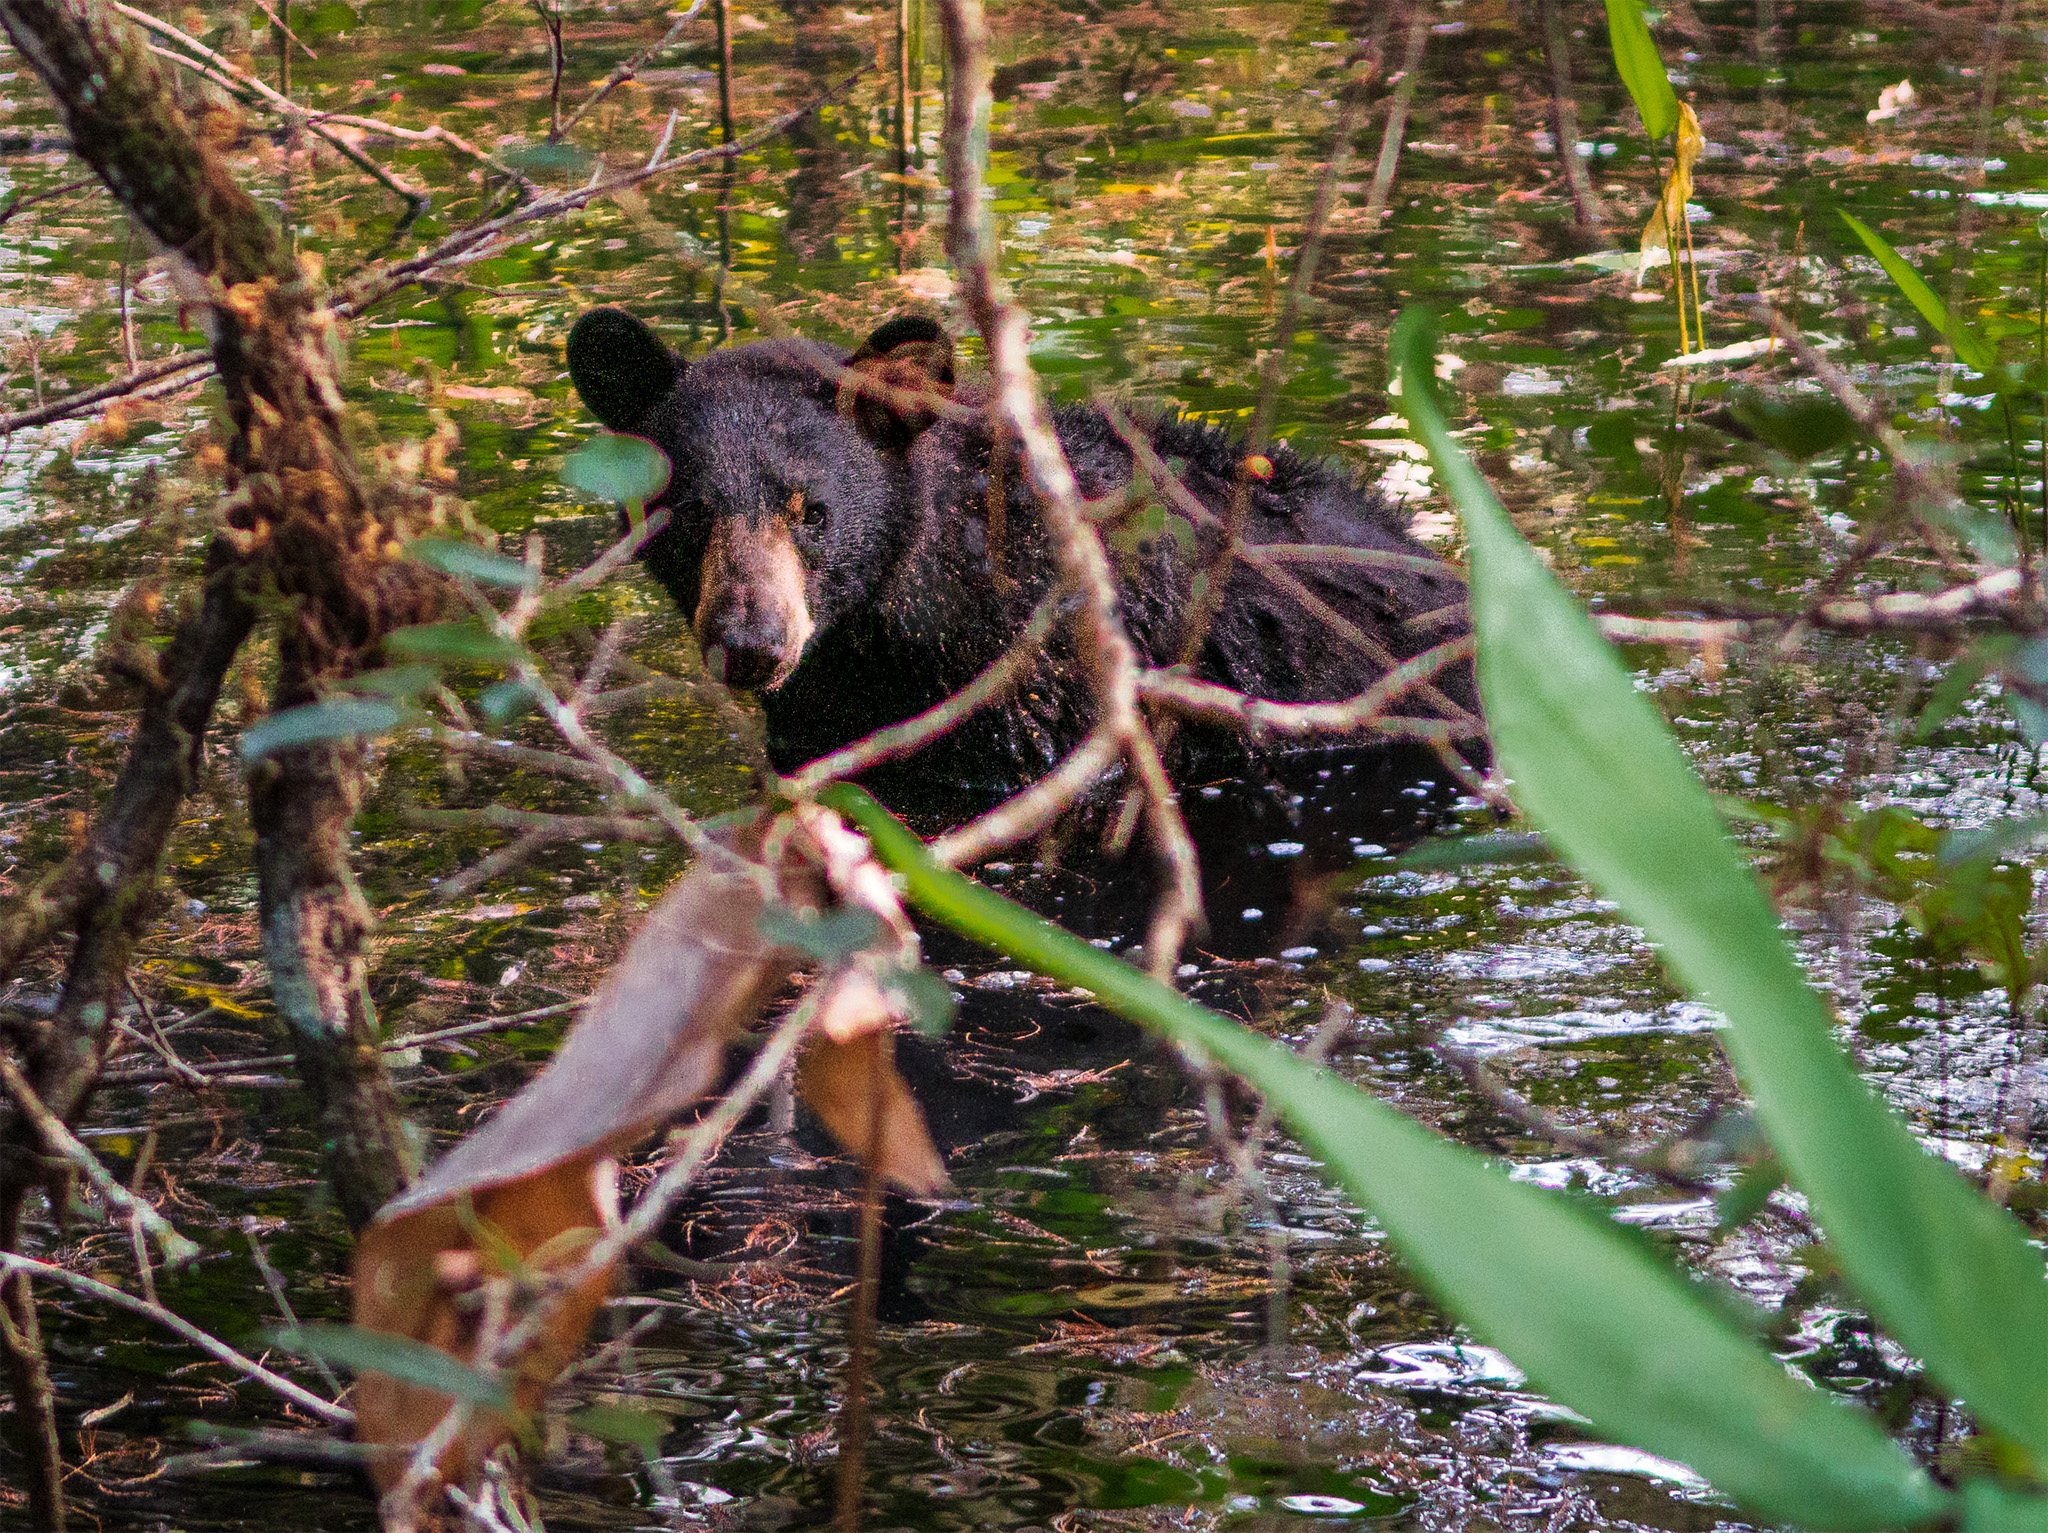 A bear in the swamp.